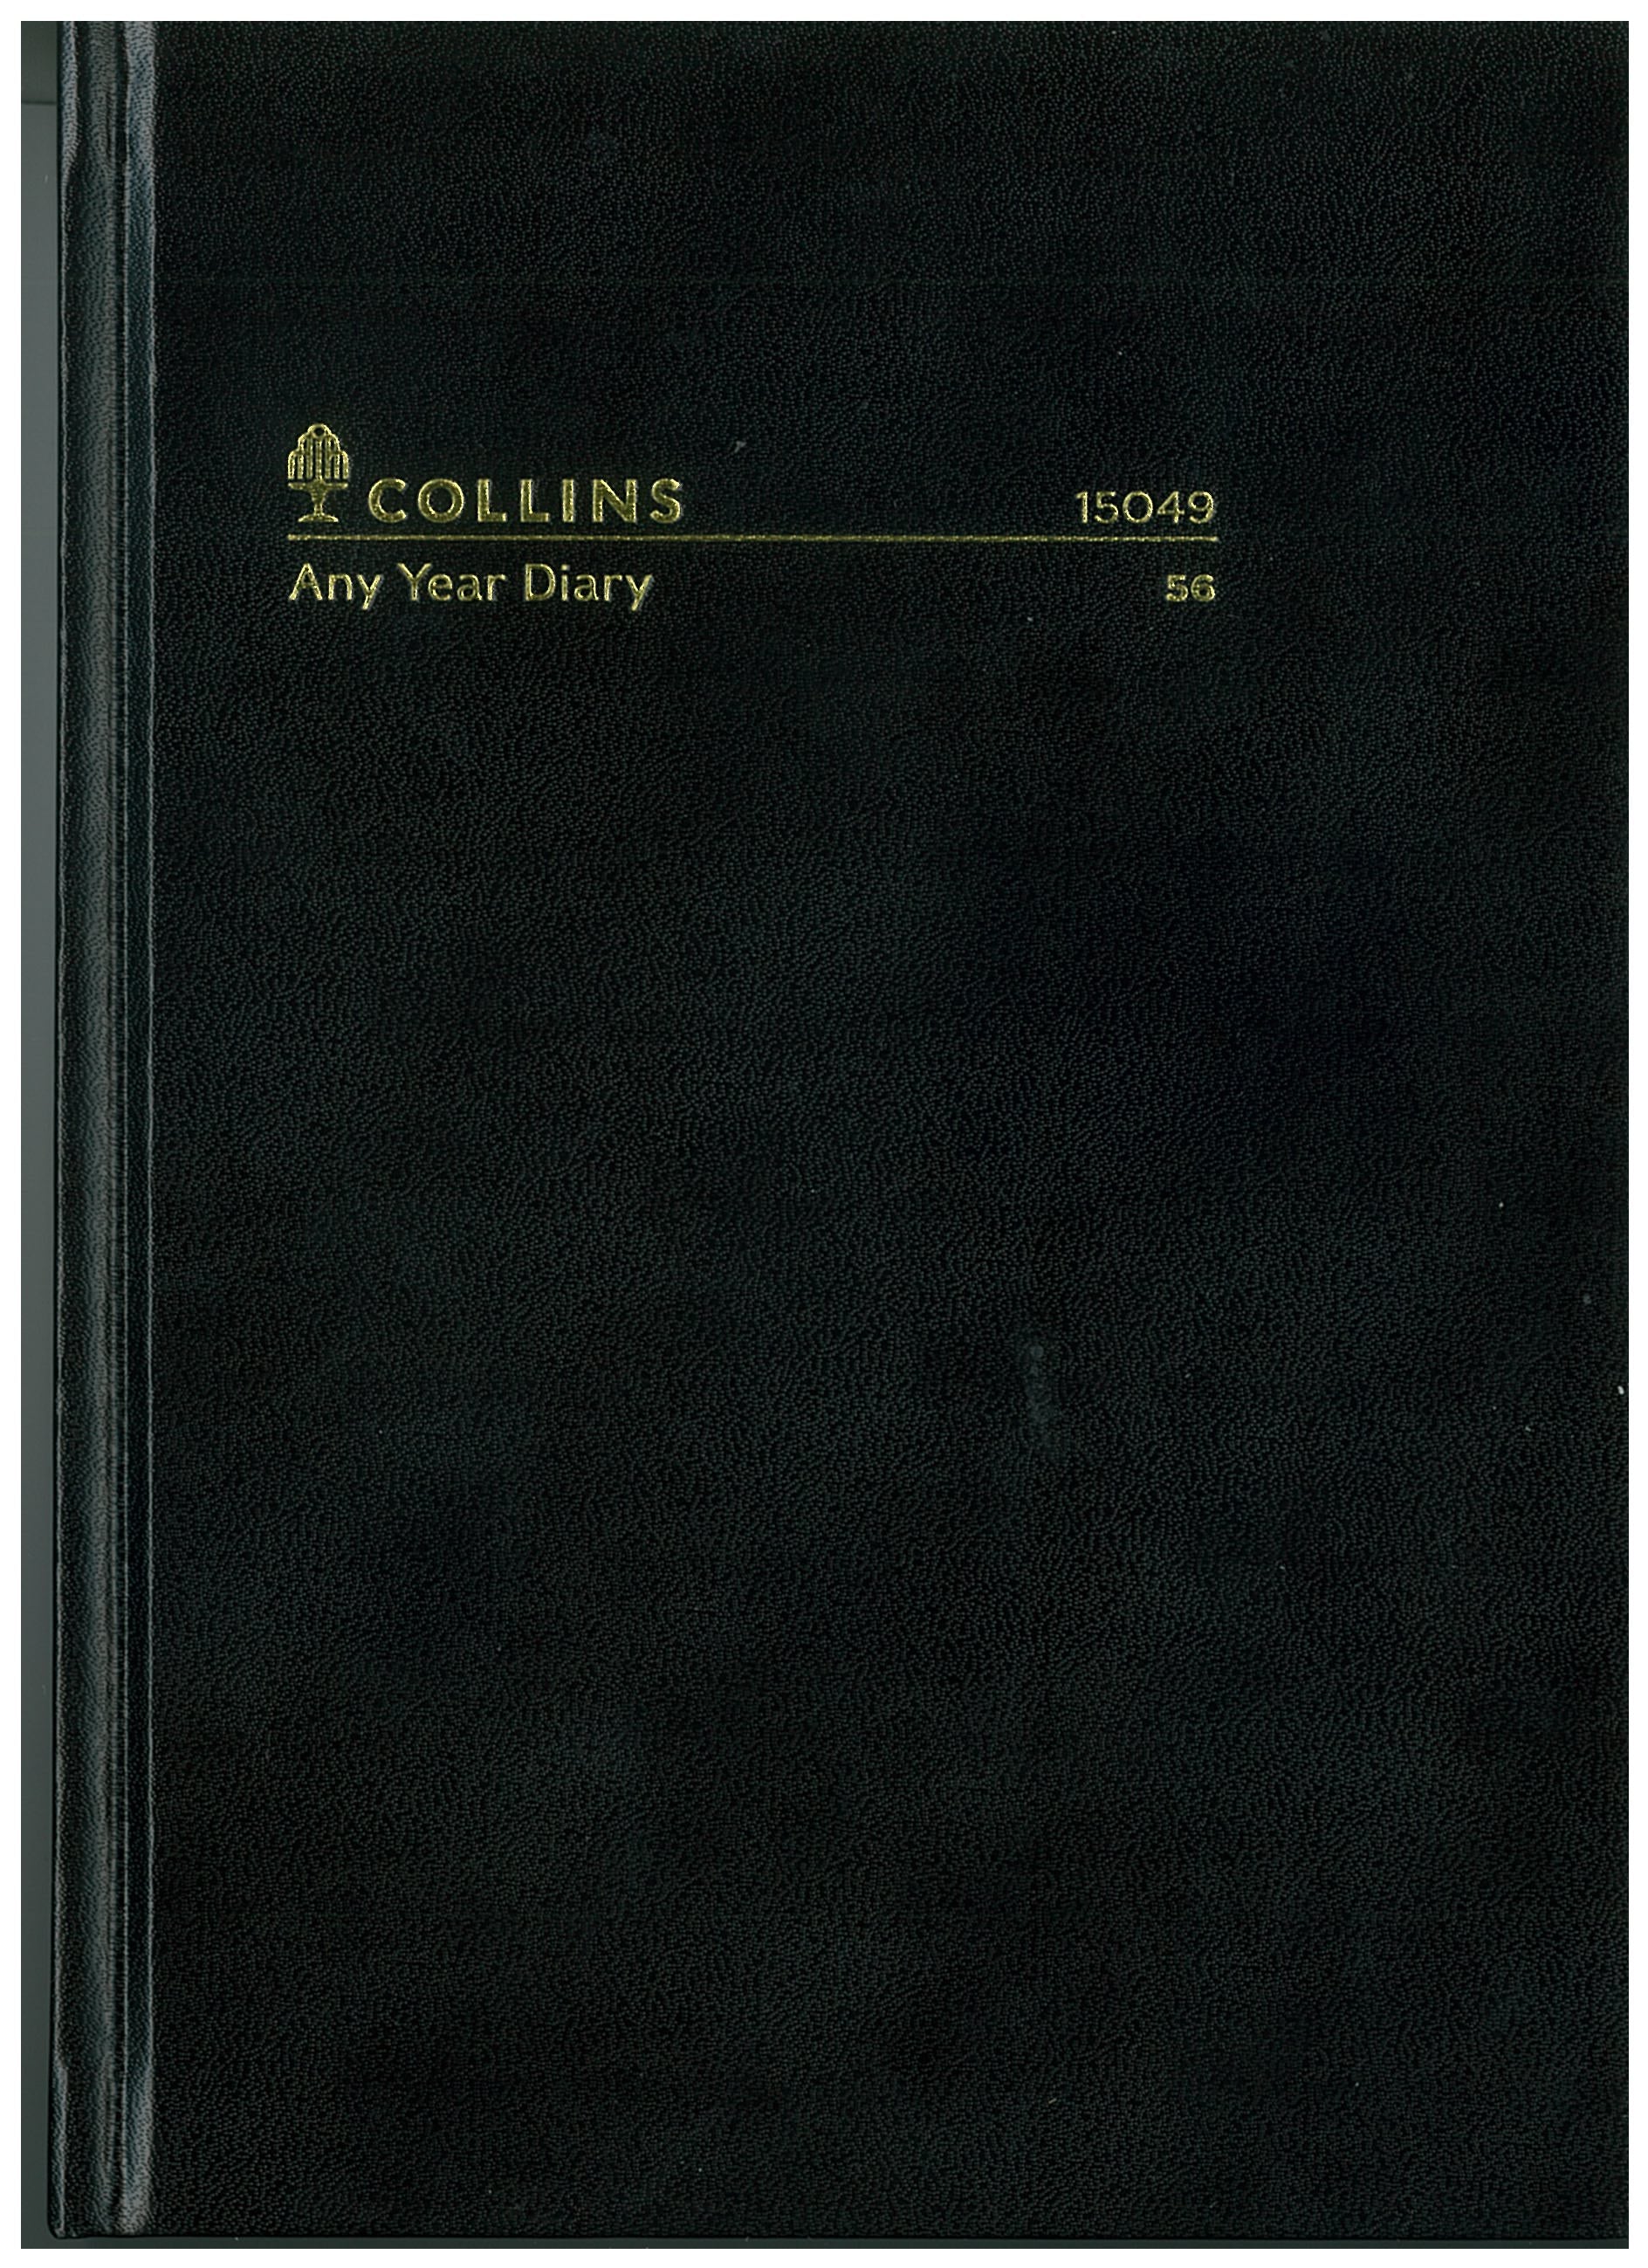 Any Year Diary A5 Daily  #56 - Collins Debden